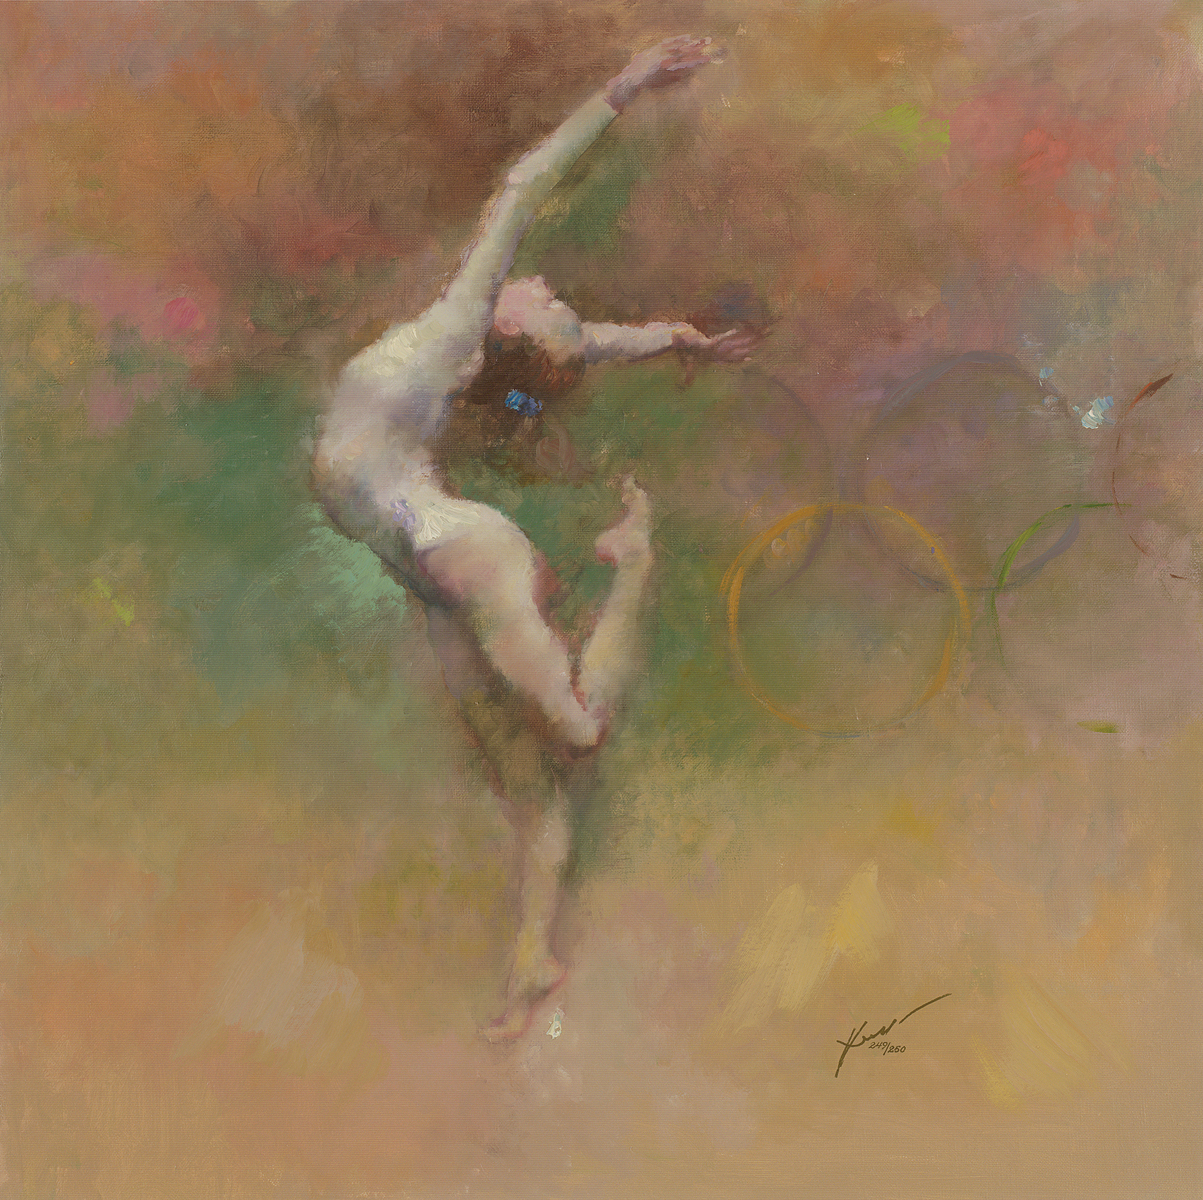 "Olympic Dreams" (2008), Hua Chen. Park West Gallery Collection